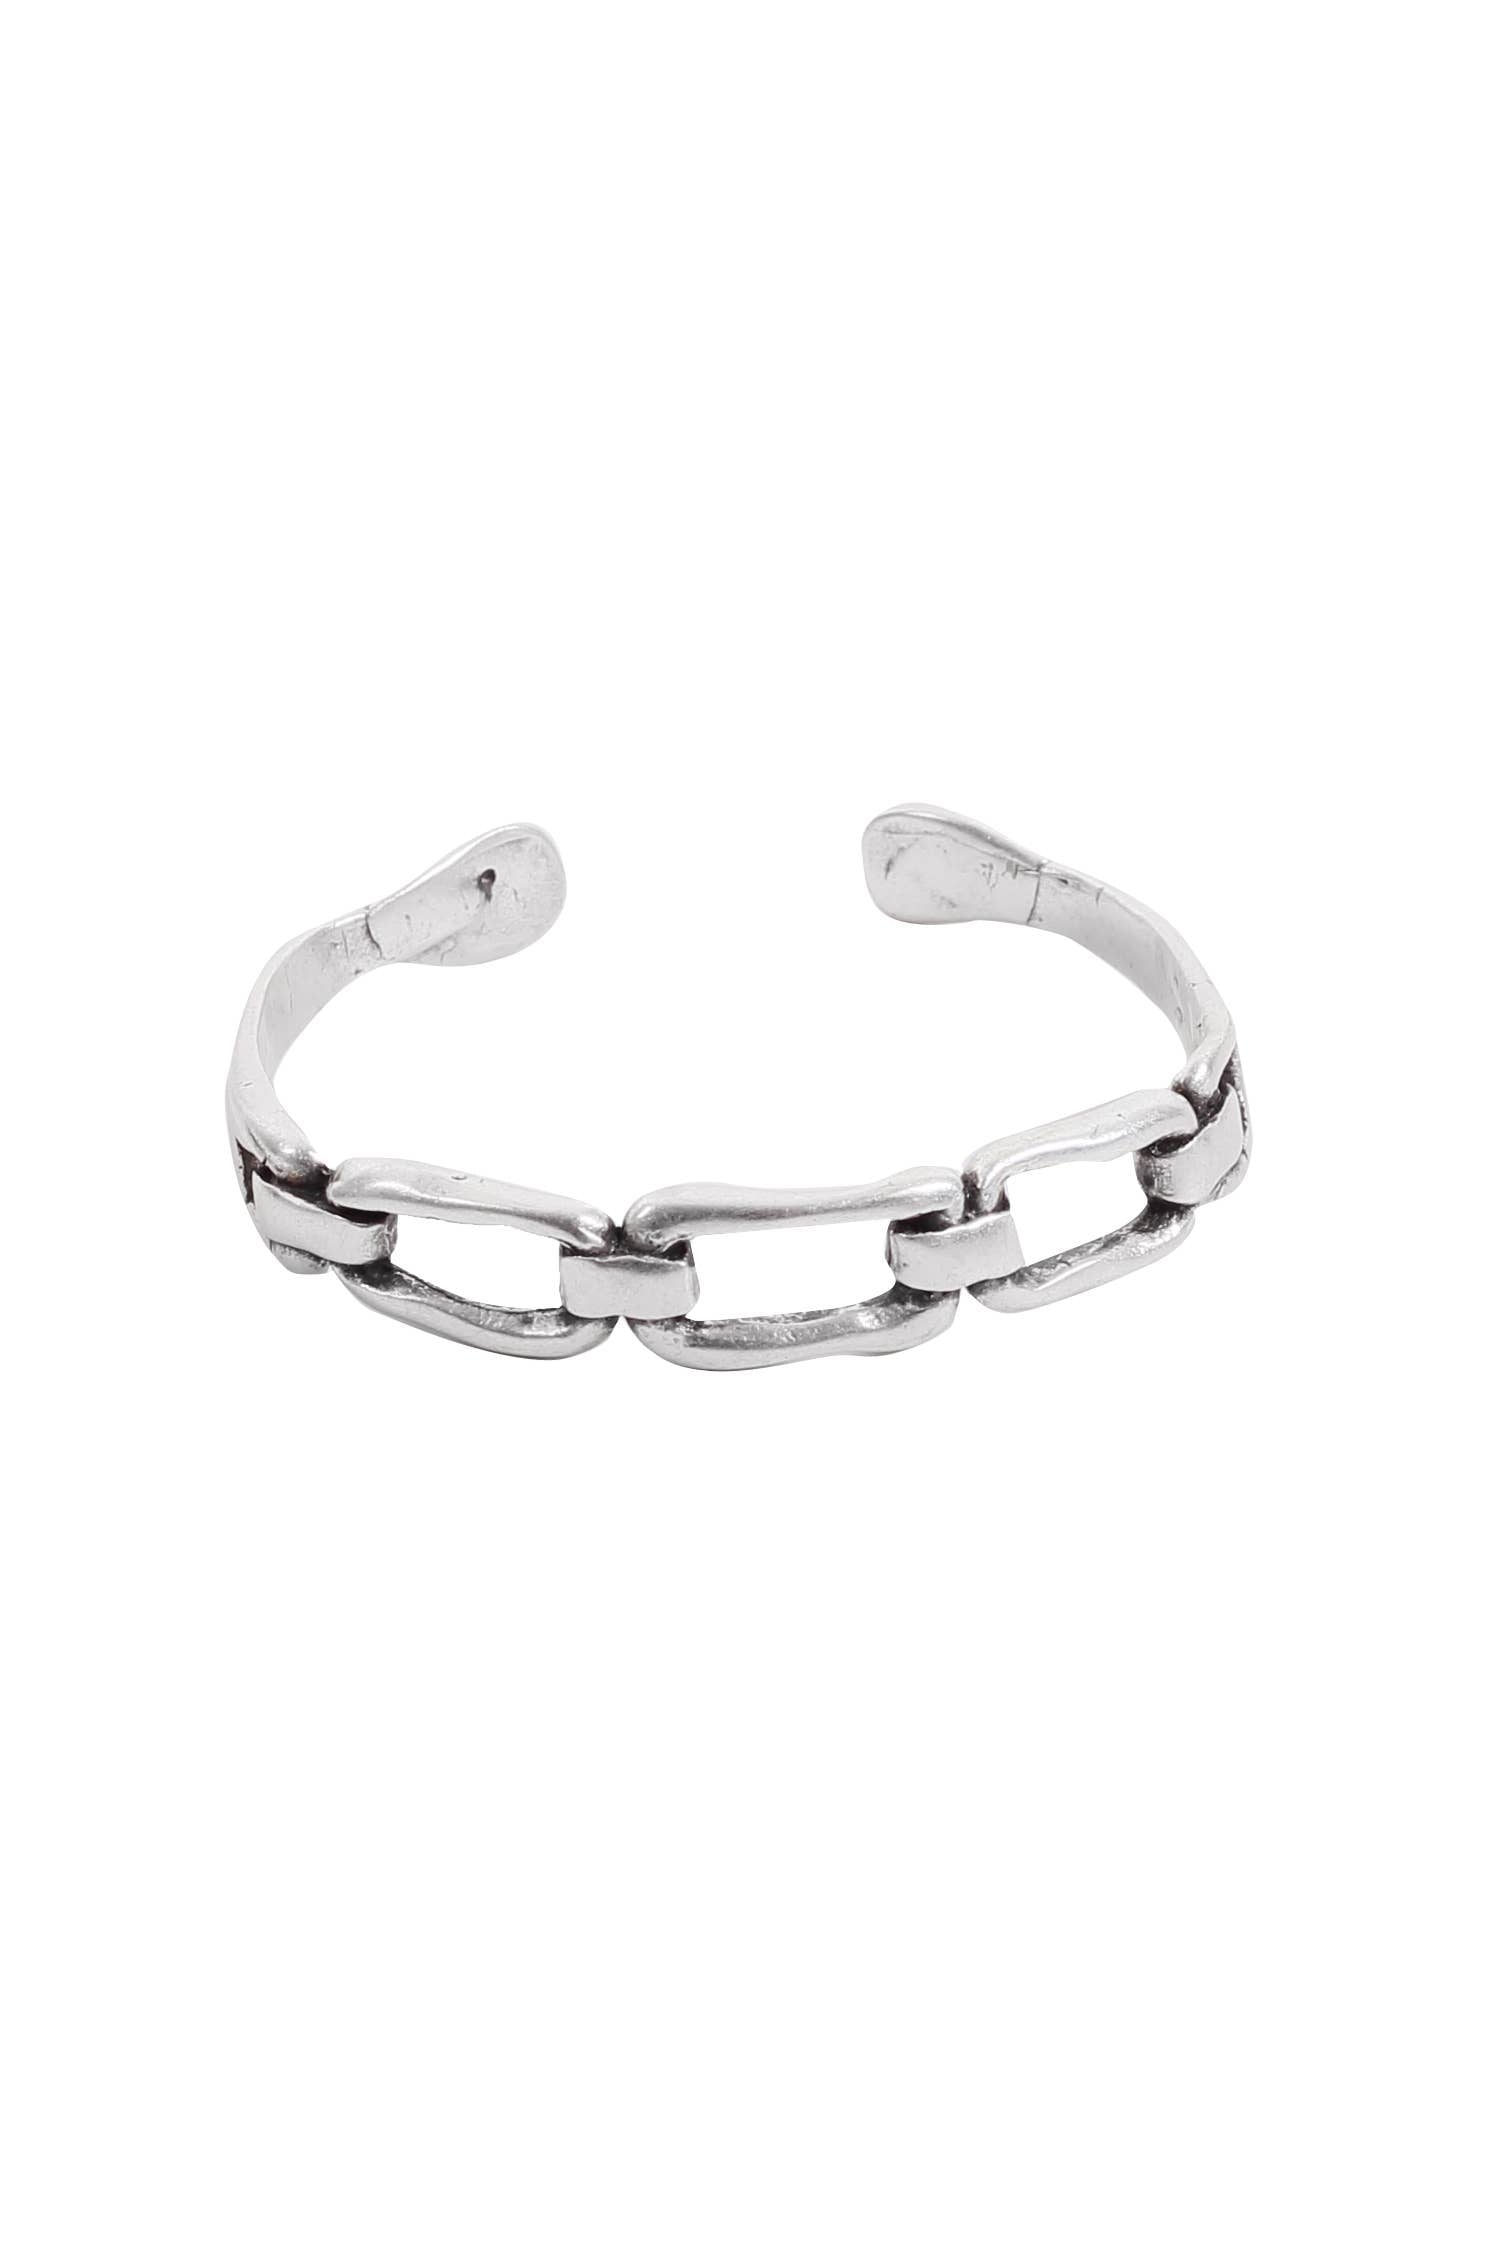 El Paseo Handmade Pewter Bracelet - Coco and lulu boutique 